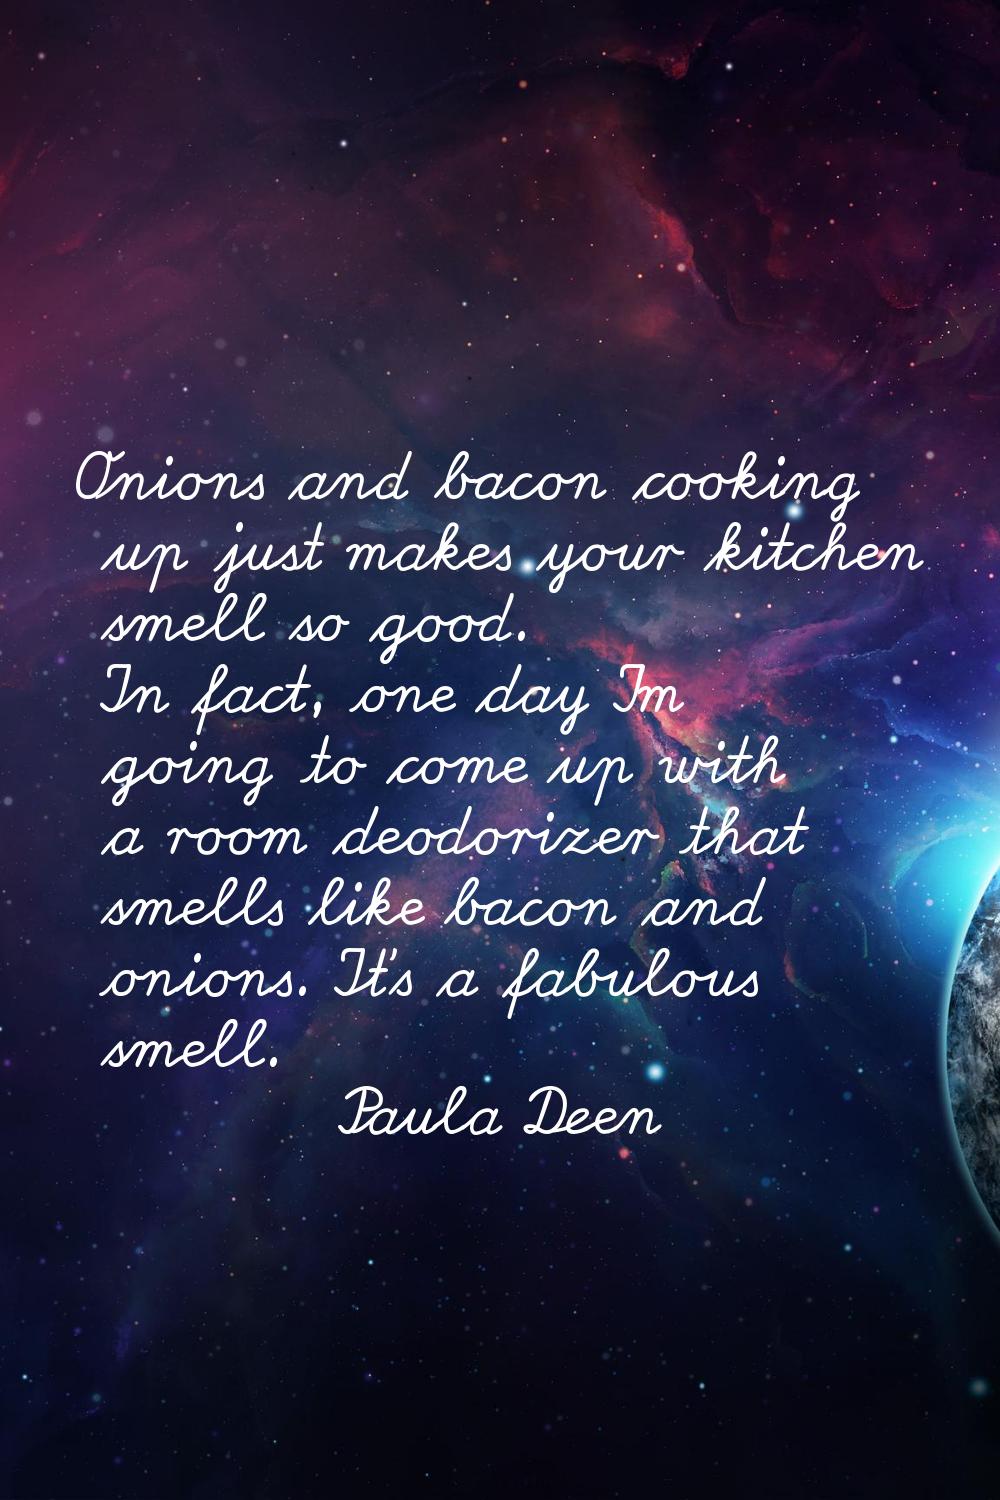 Onions and bacon cooking up just makes your kitchen smell so good. In fact, one day I'm going to co